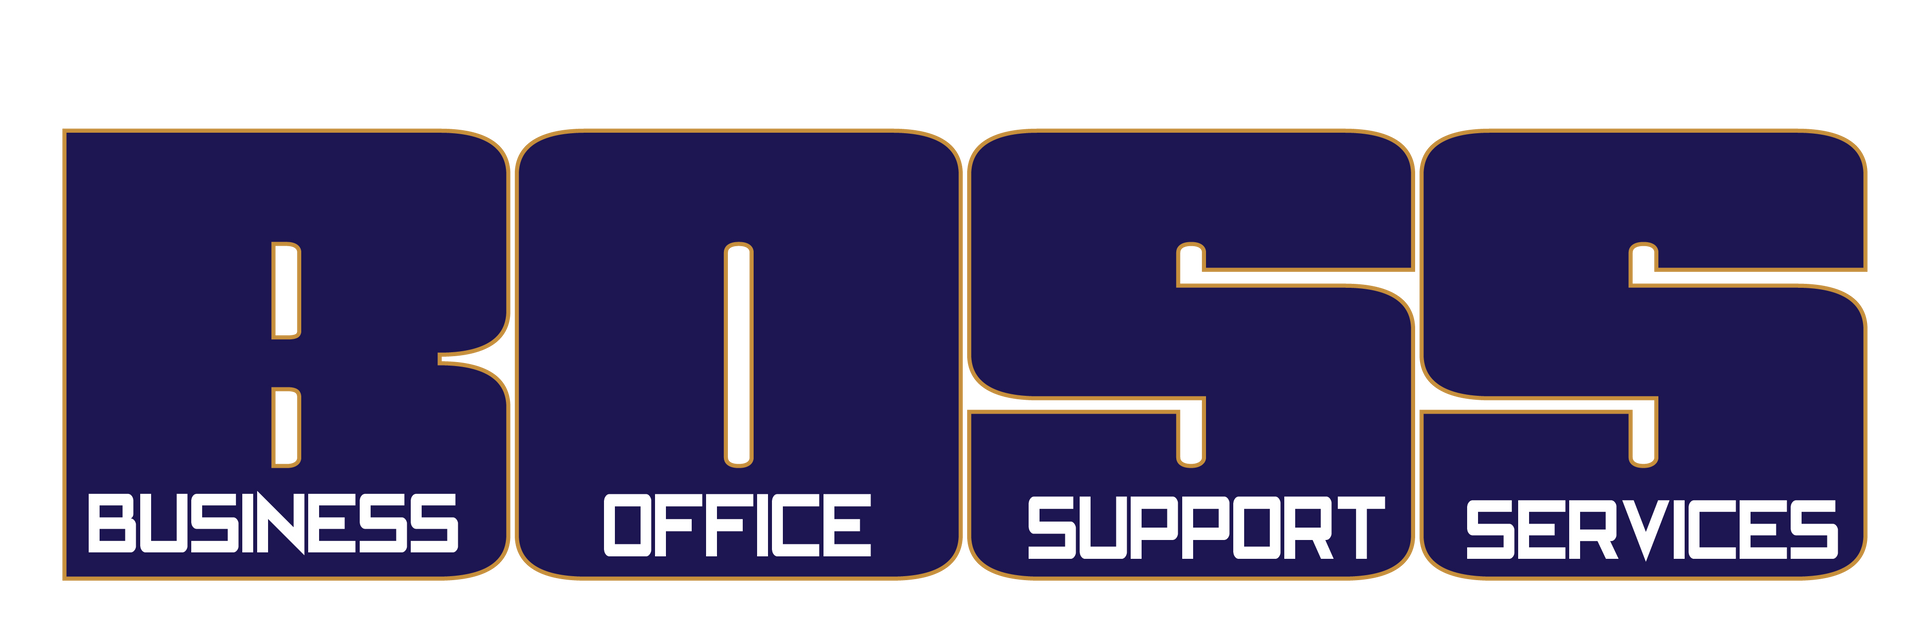 BOSS Business Office Support Services